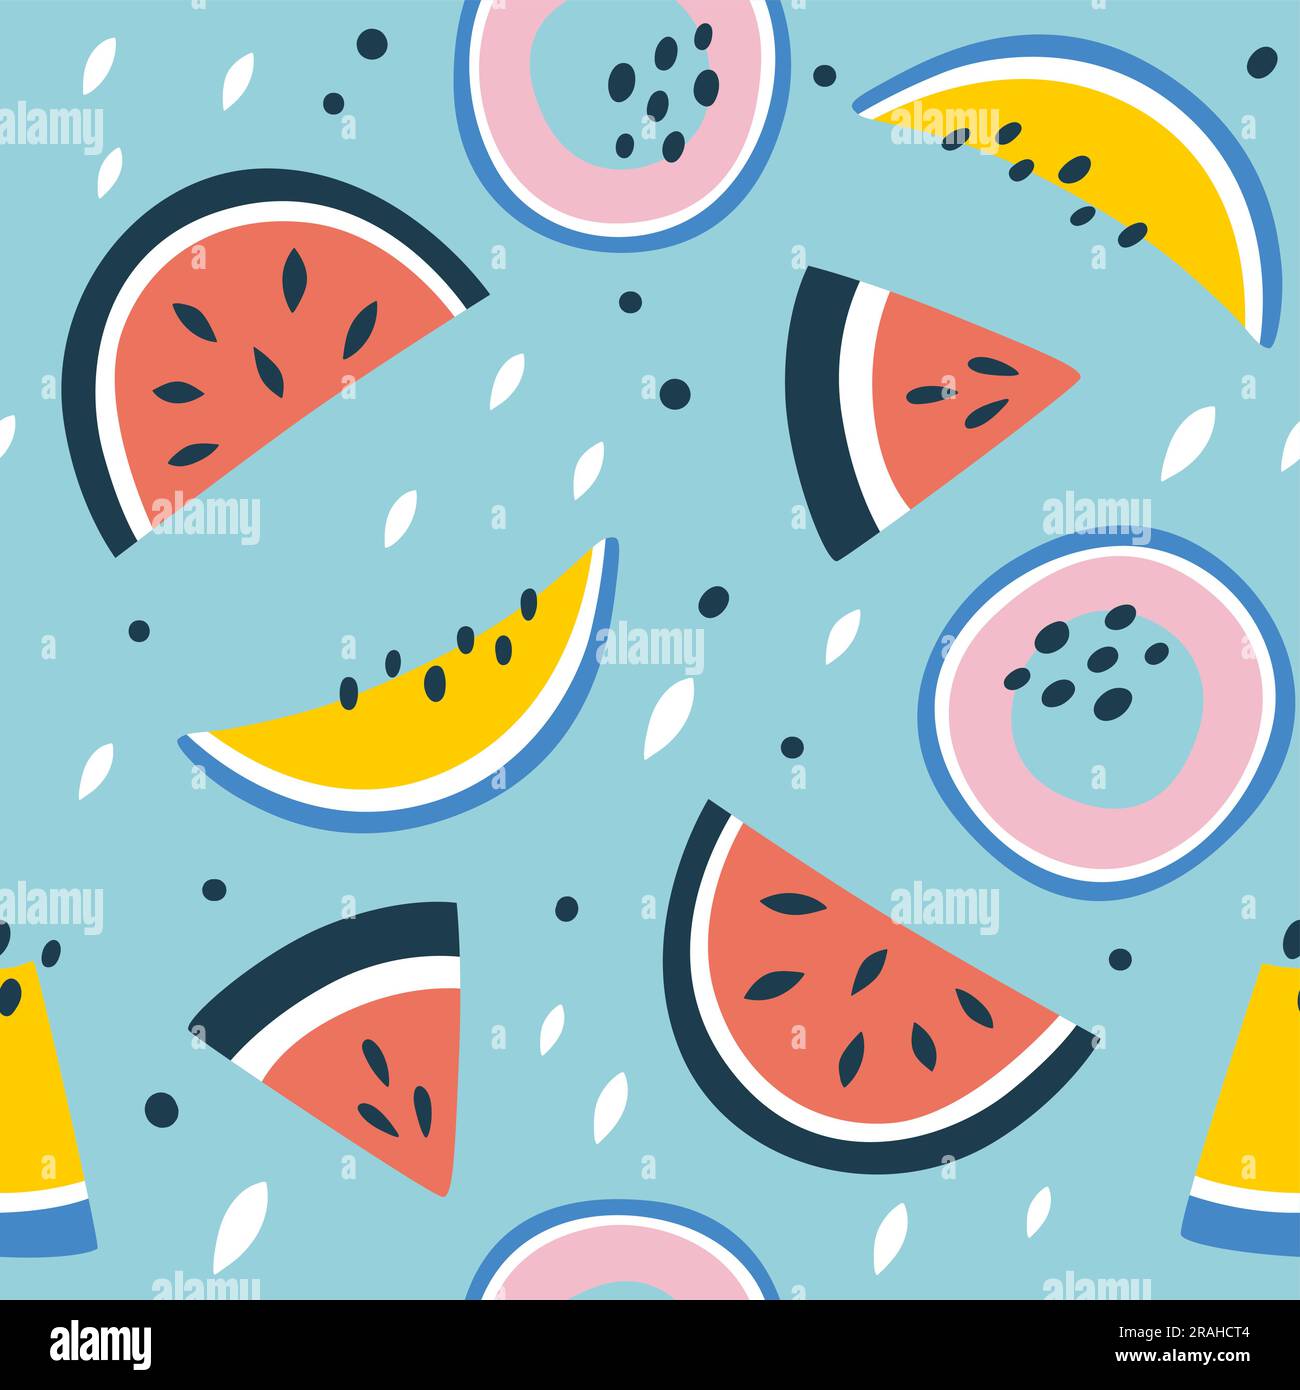 Watermelon fruit seamless pattern. Square repeat pattern, with melon and watermelon slices. Abstract colorful composition. Flat vector design pattern. Stock Vector